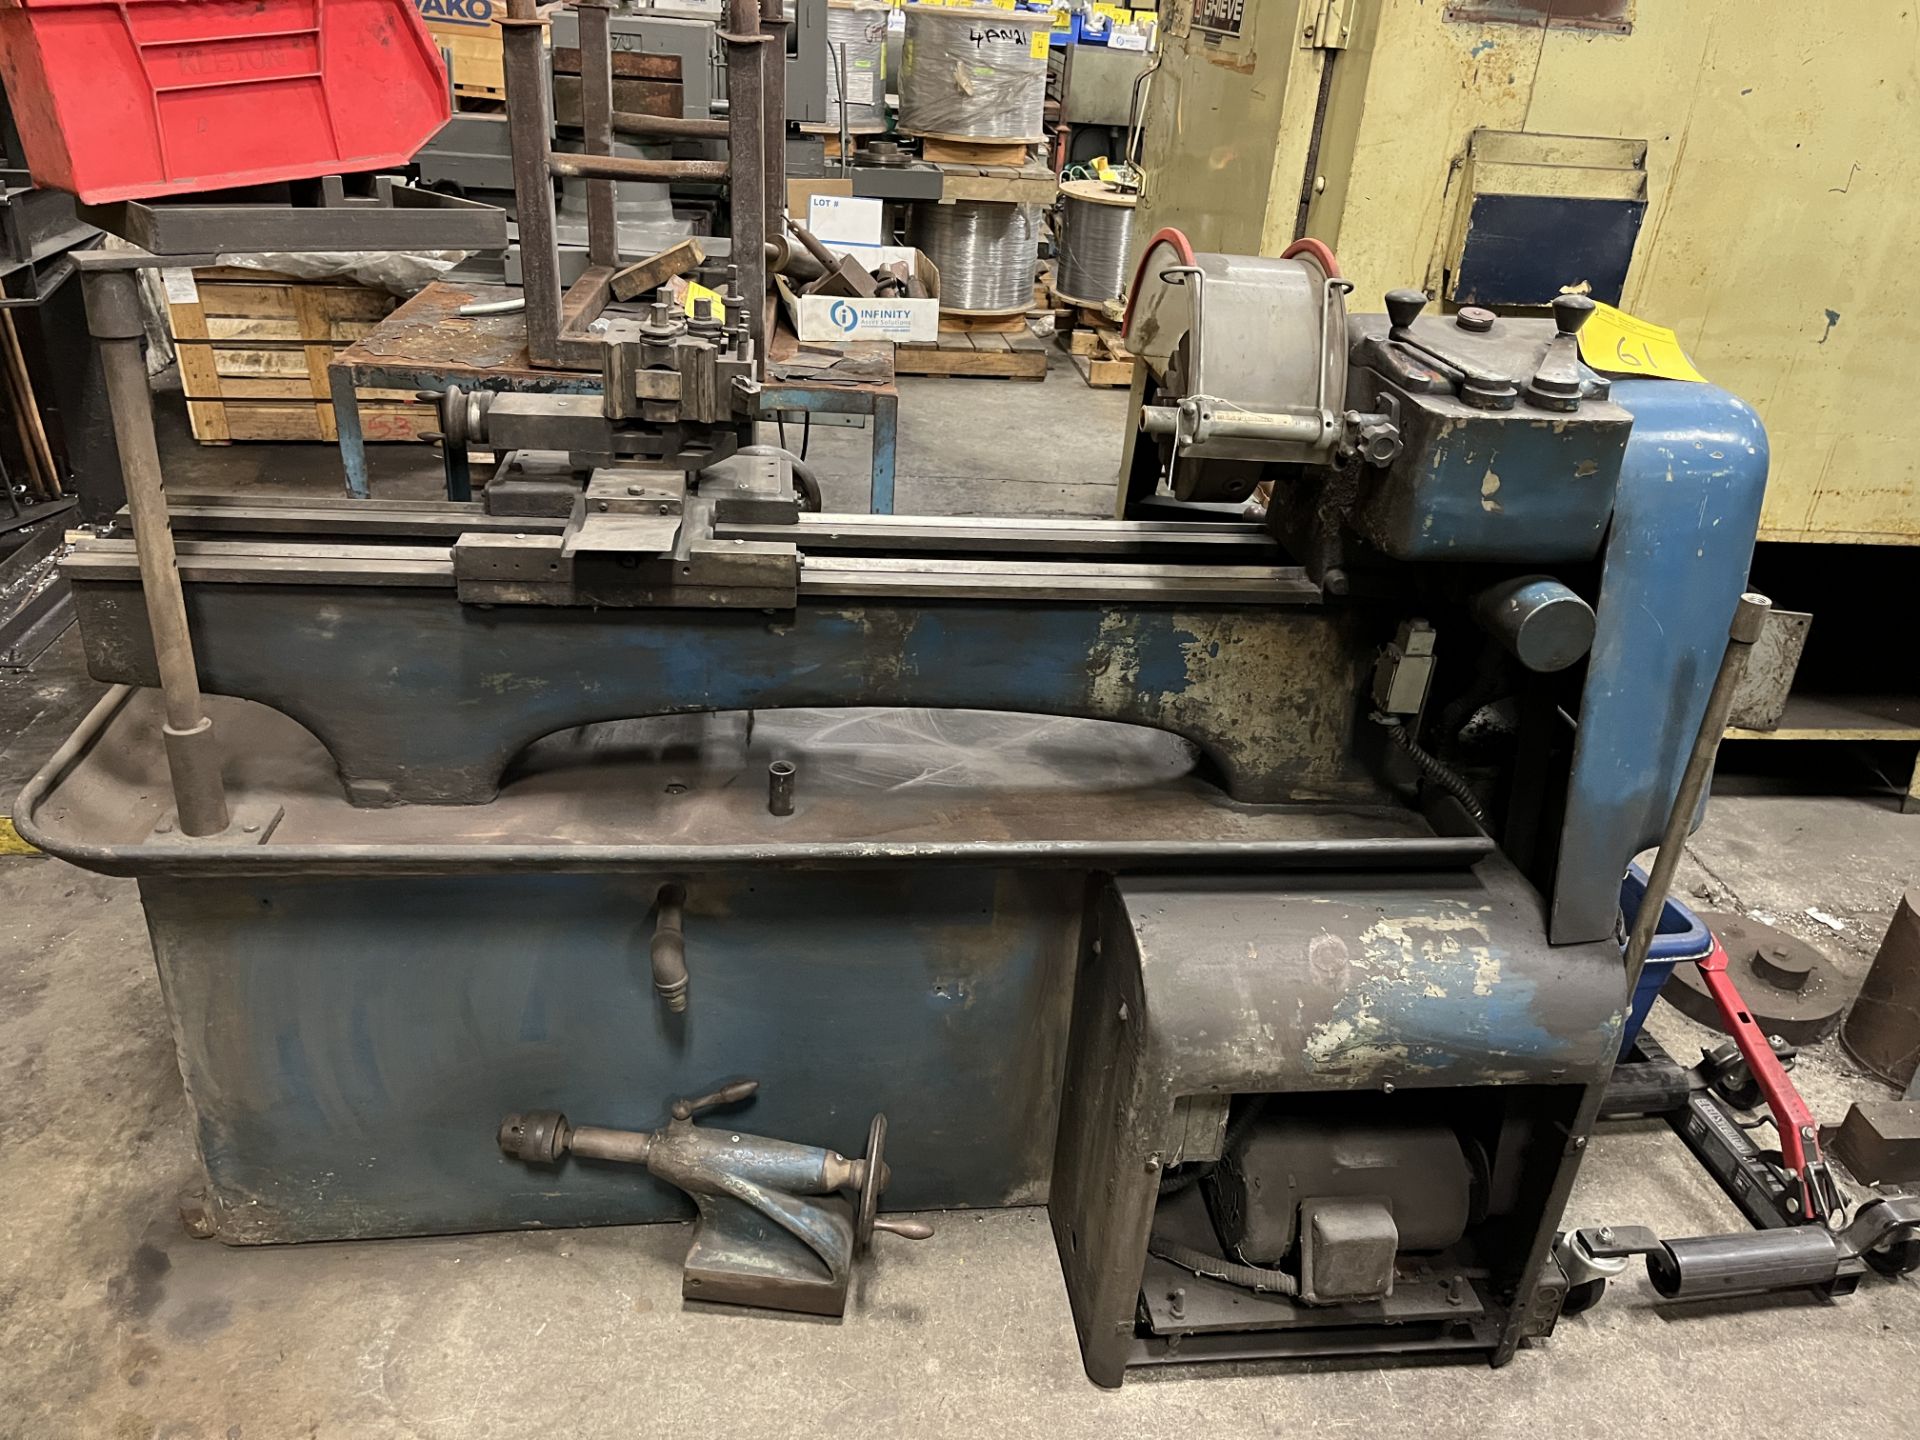 COLCHESTER DOMINION 13X36 ENGINE LATHE, 6" 3-JAW CHUCK, 48" BED, SPEEDS TO 1,000 RPM, TOOL POST,